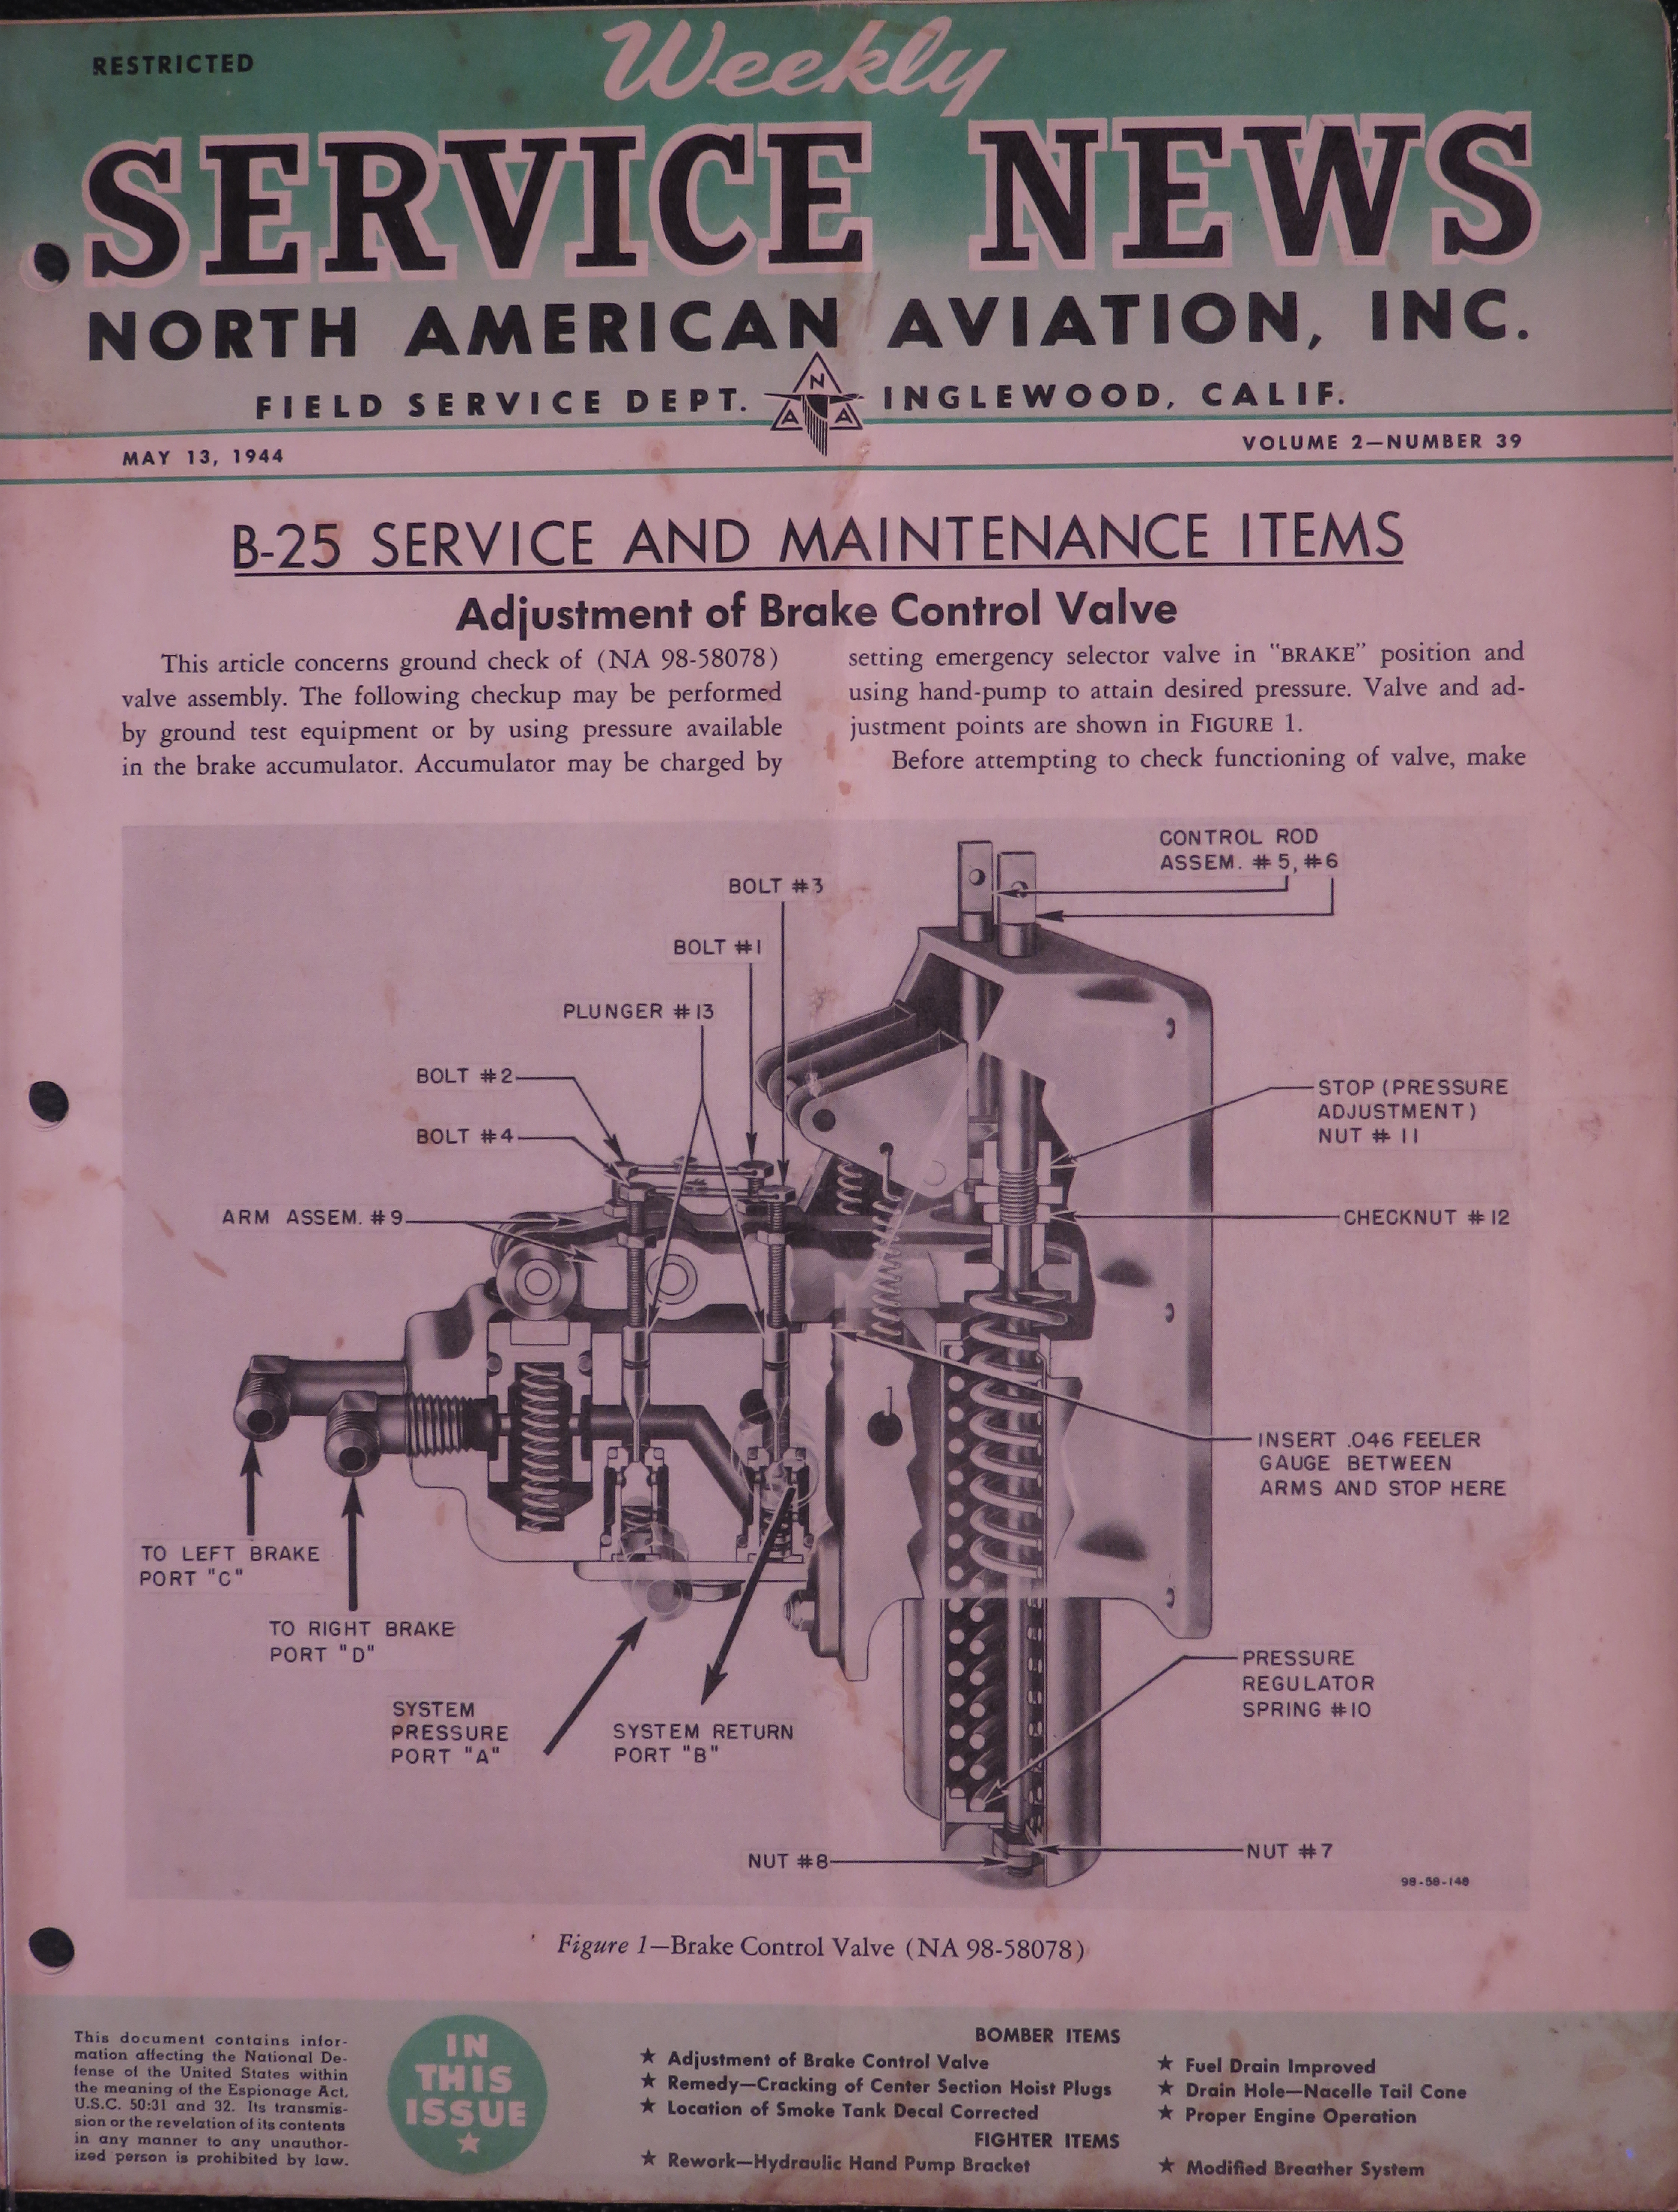 Sample page 1 from AirCorps Library document: Volume 2, No. 39 - Weekly Service News